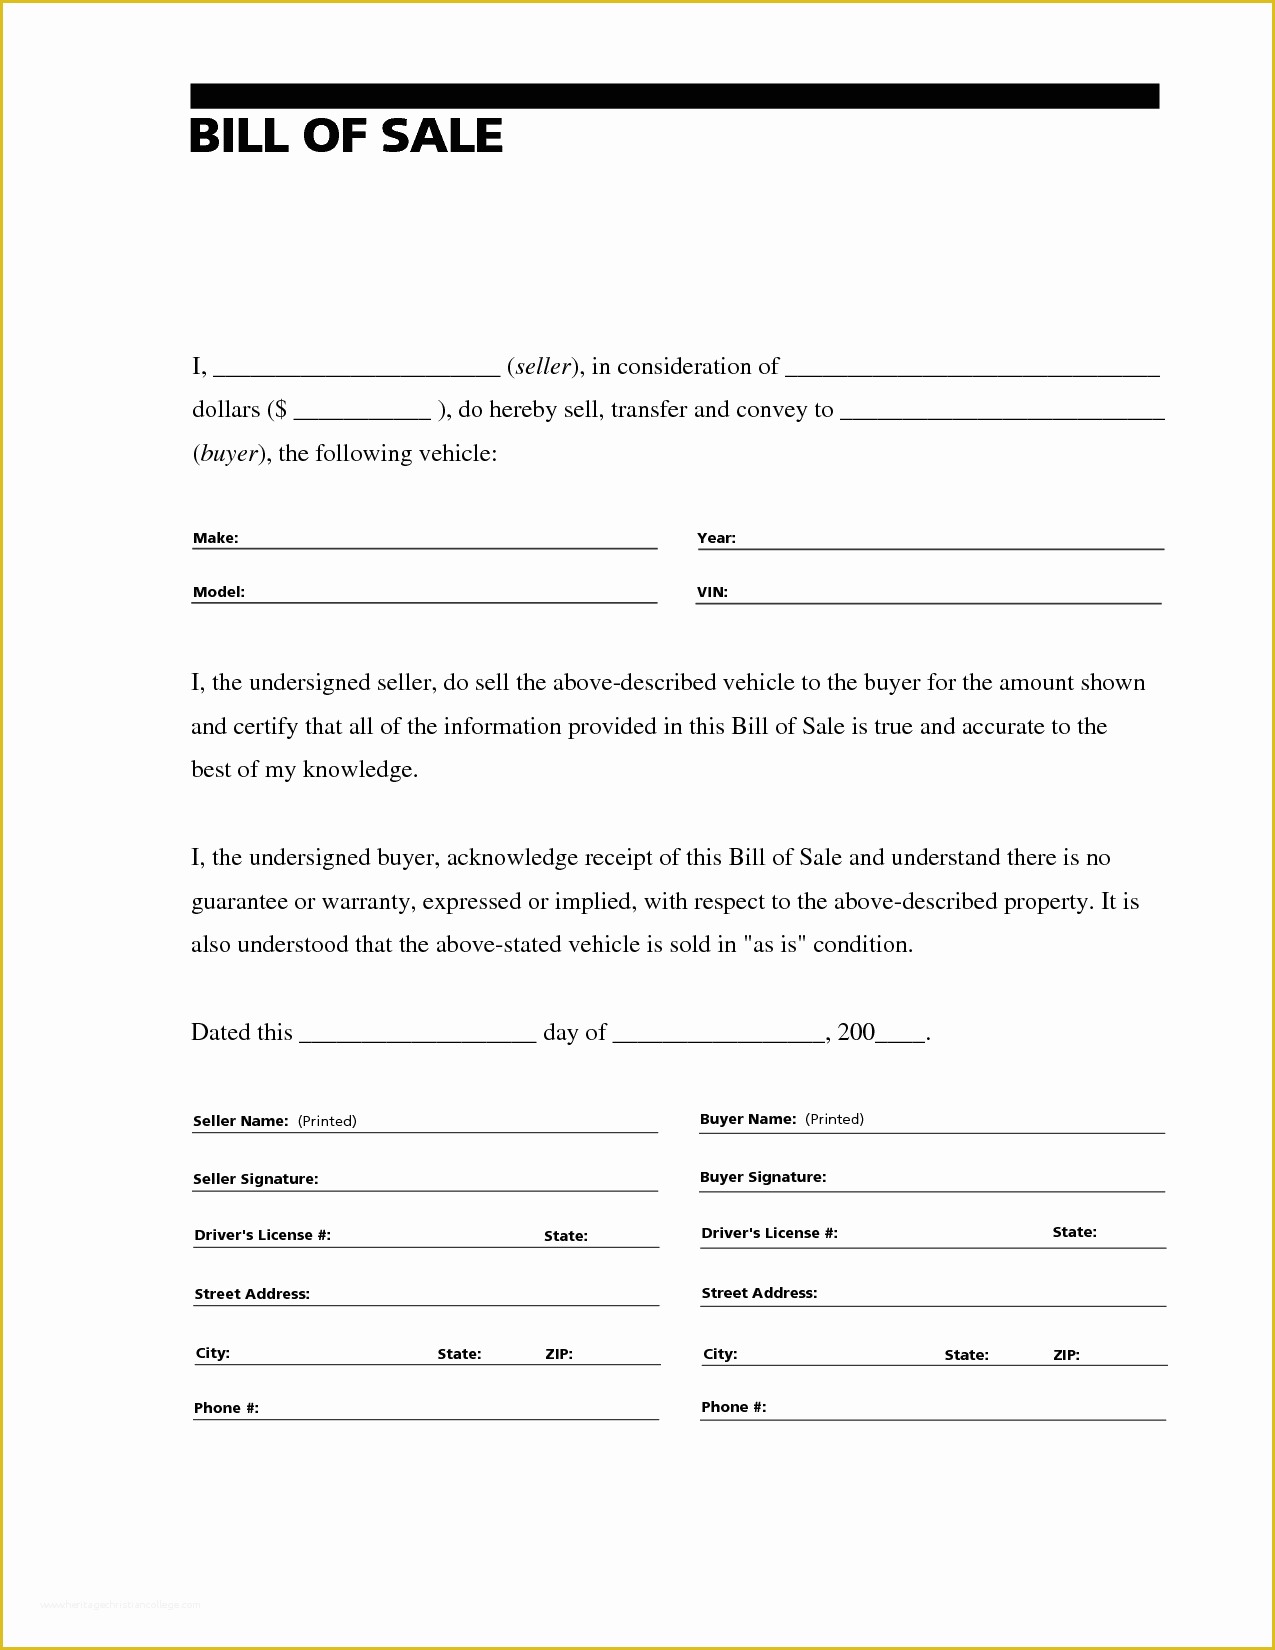 Free Vehicle Bill Of Sale Template Word Of Free Vehicle Bill Of Sale Word Document Best Of